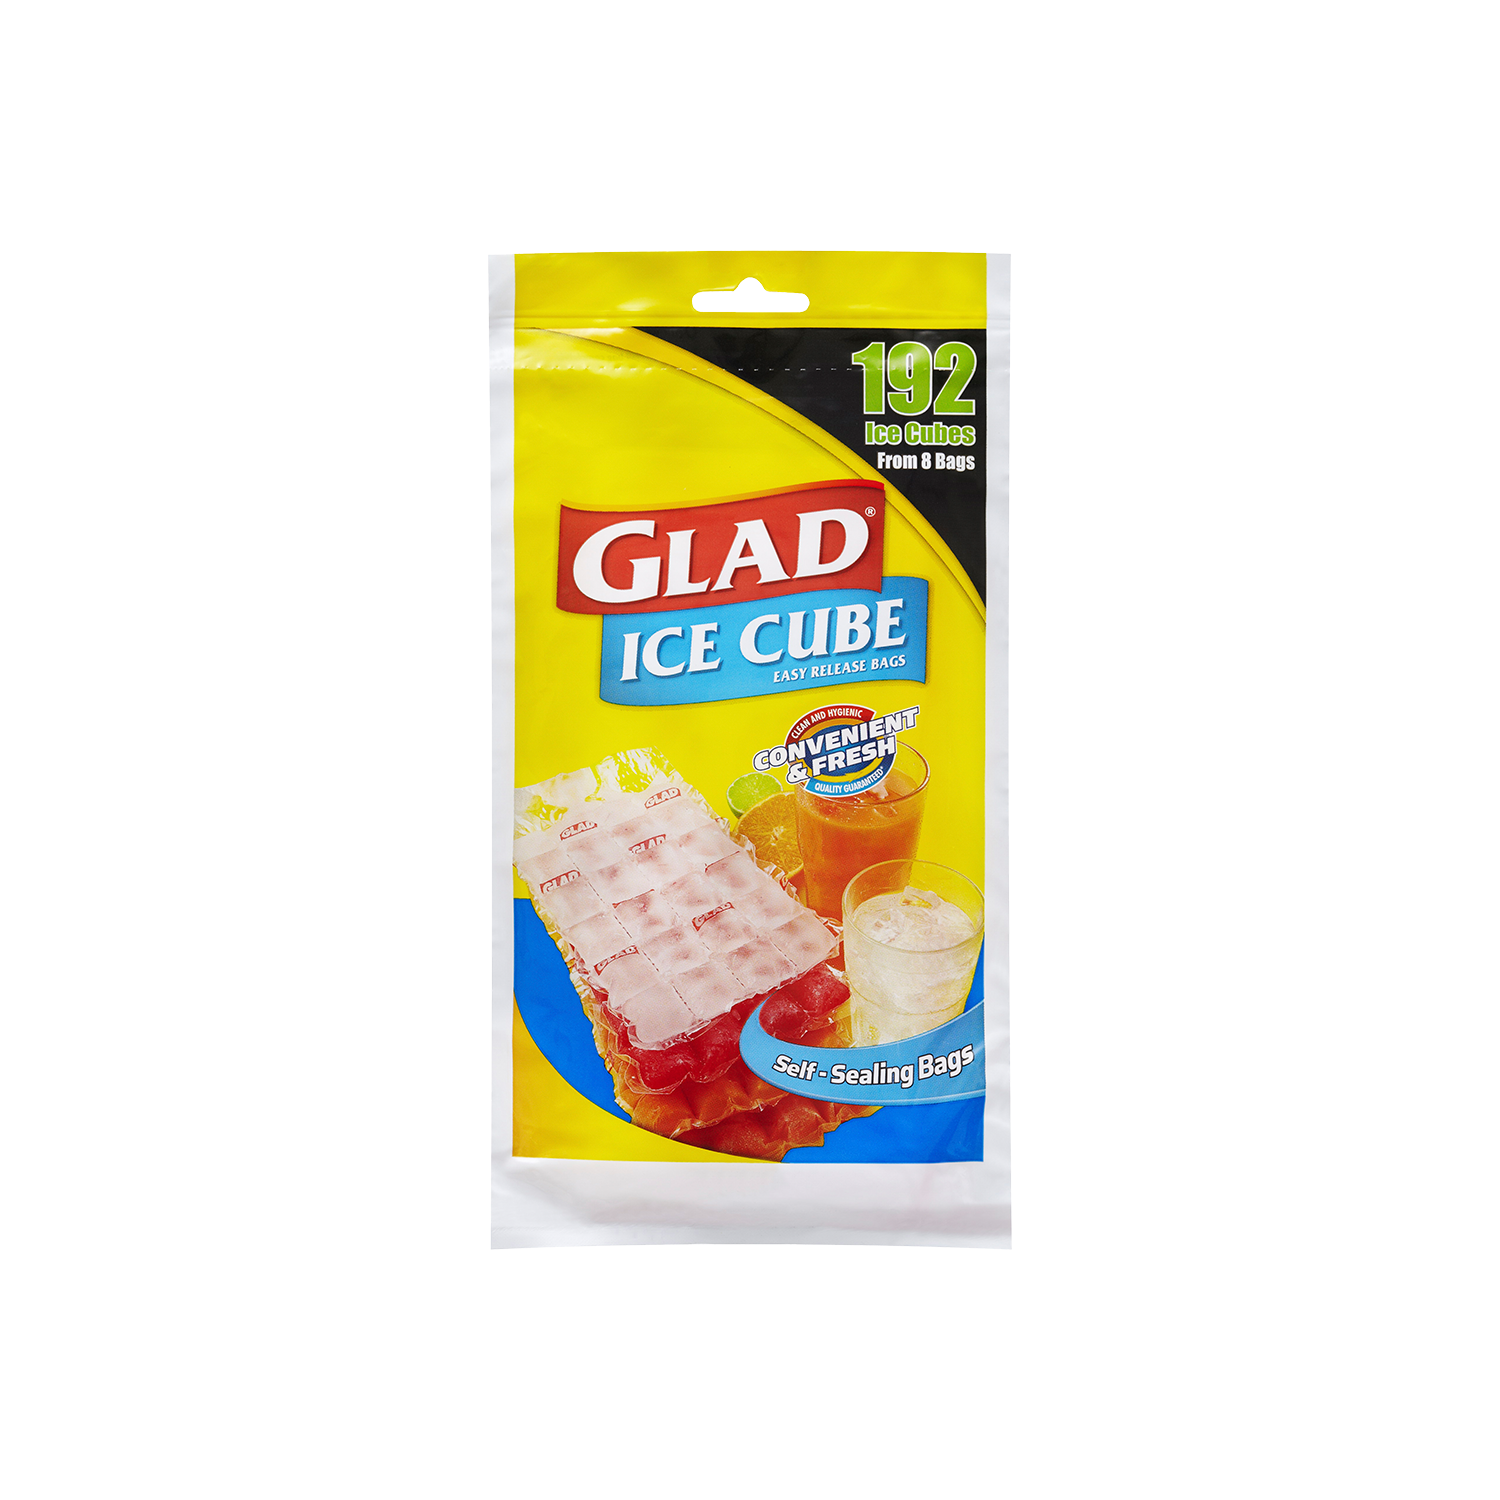 https://www.glad.co.nz/wp-content/uploads/sites/3/2020/12/Glad-Ice-Cube-Bags-8pk.png